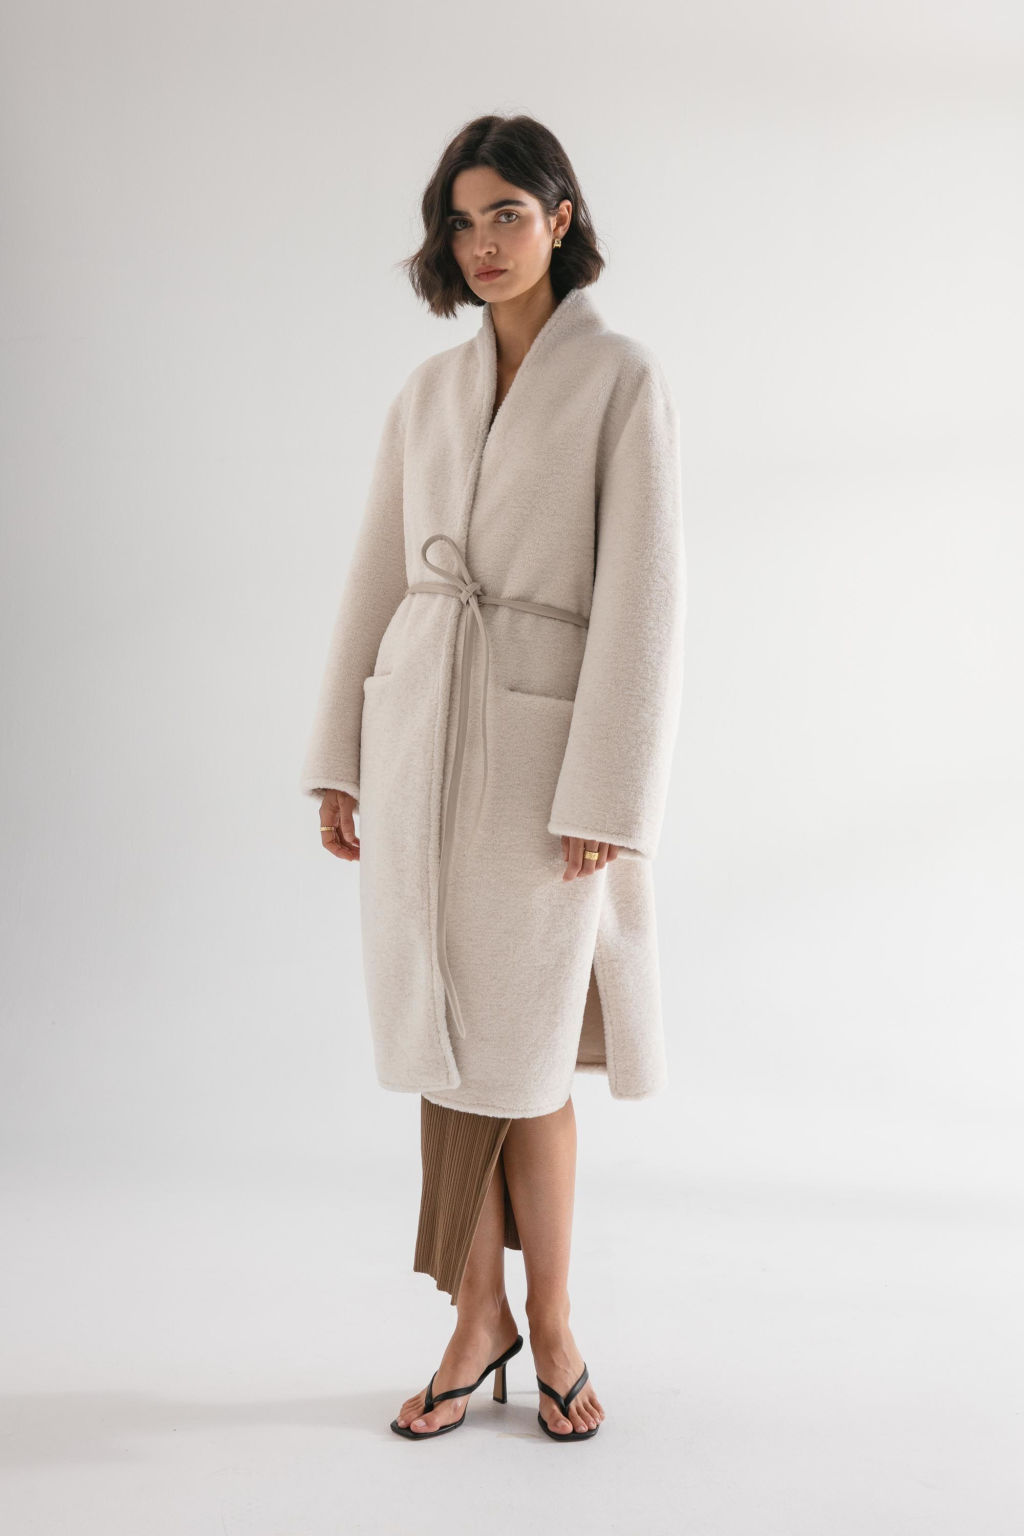 The Lucy coat by Melbourne's own Friends With Frank. Photo: Friends With Frank